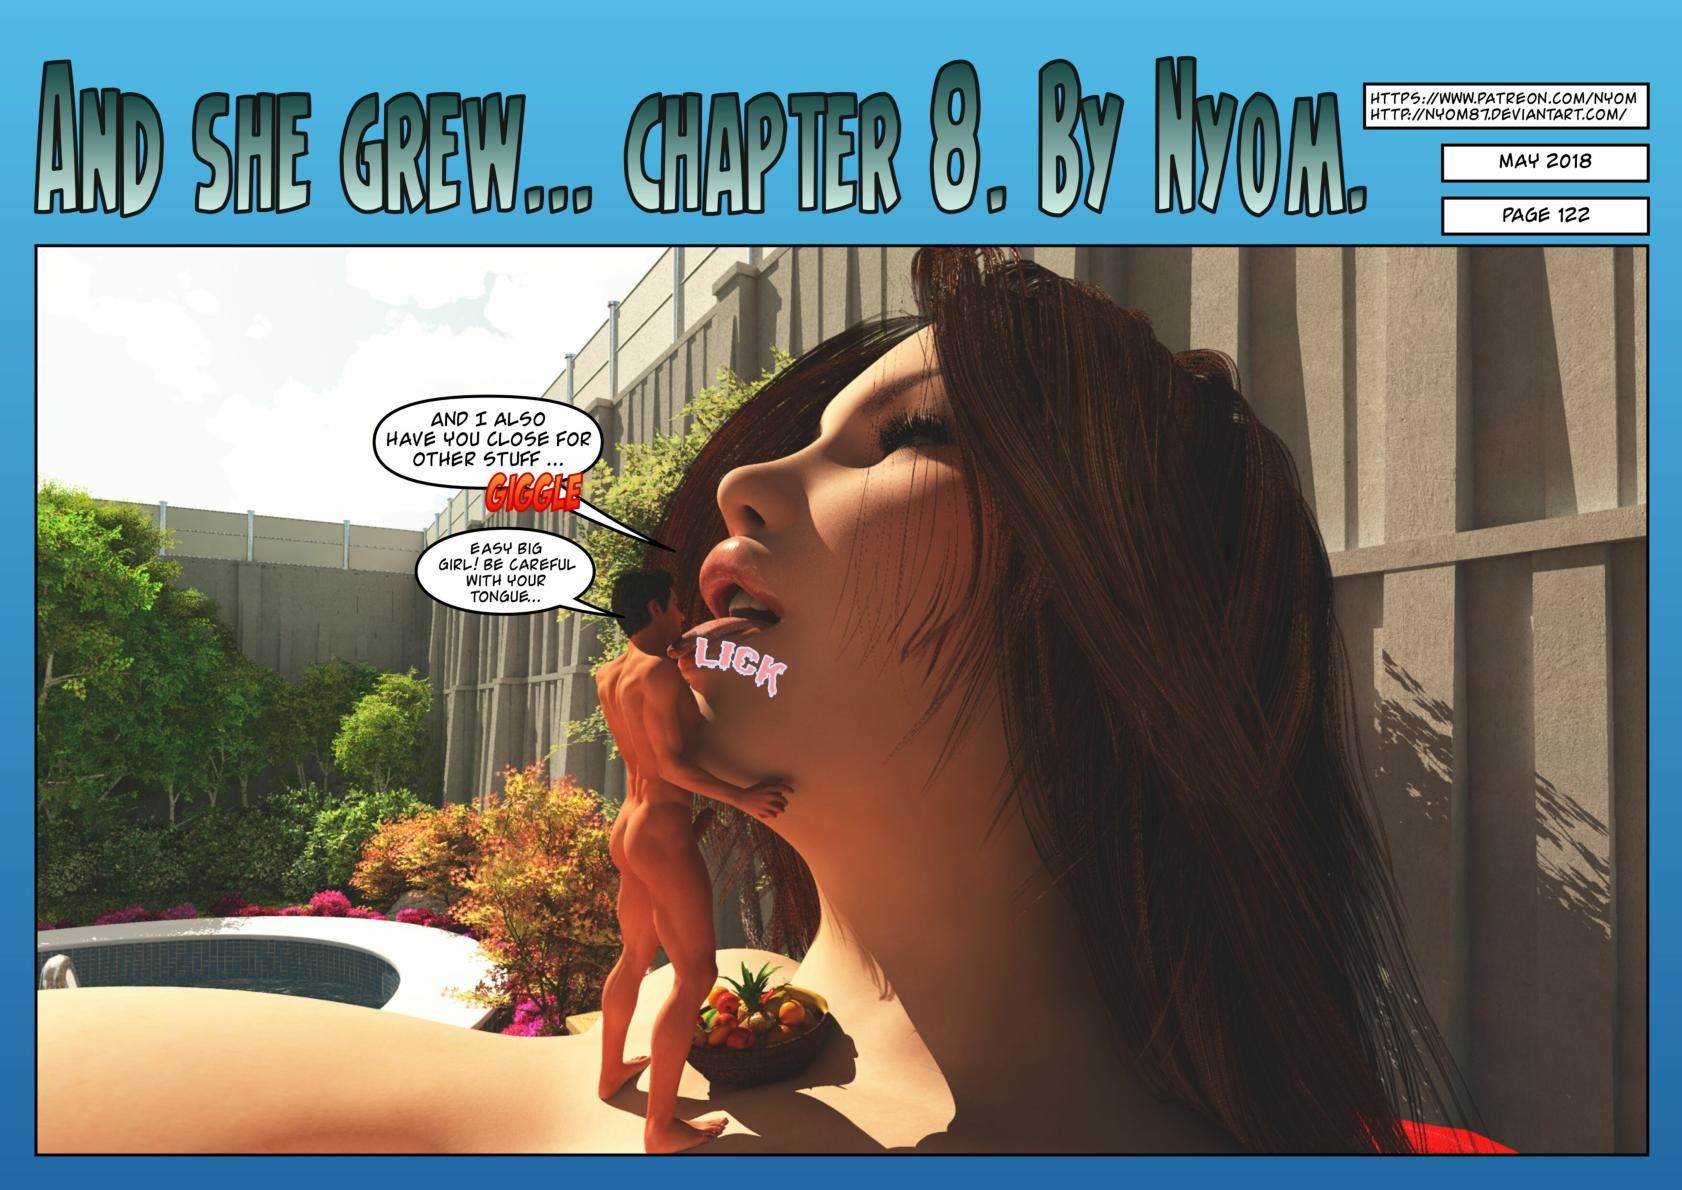 And She Grew Ch.8 Nyom page 124